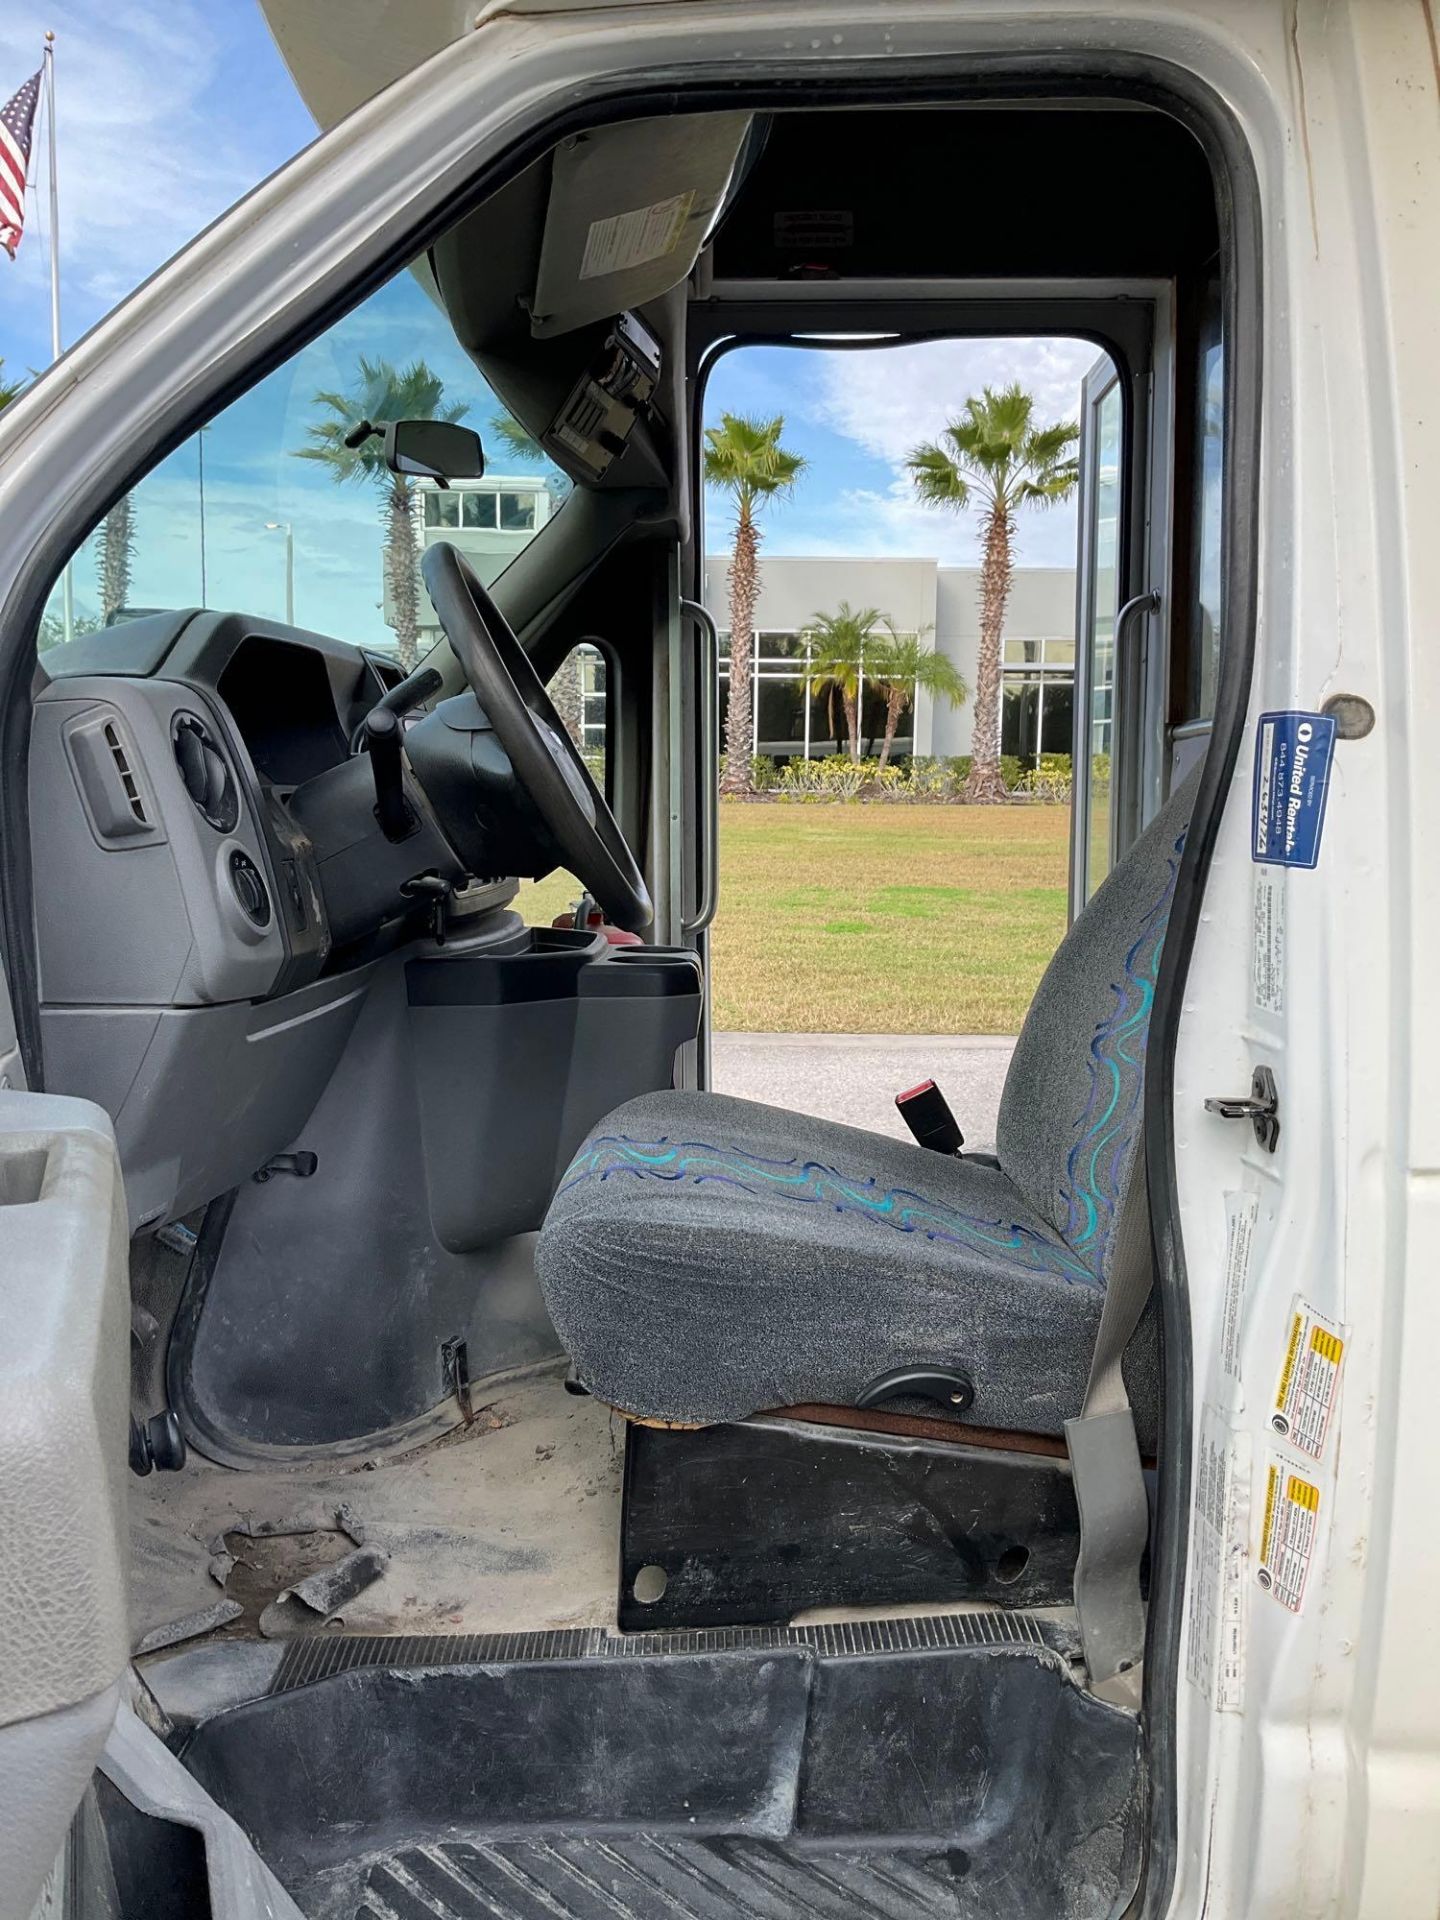 2018 FORD ECONOLINE 450 SHUTTLE BUS, GAS AUTOMATIC, 28 PASSENGER SEATING - Image 9 of 31